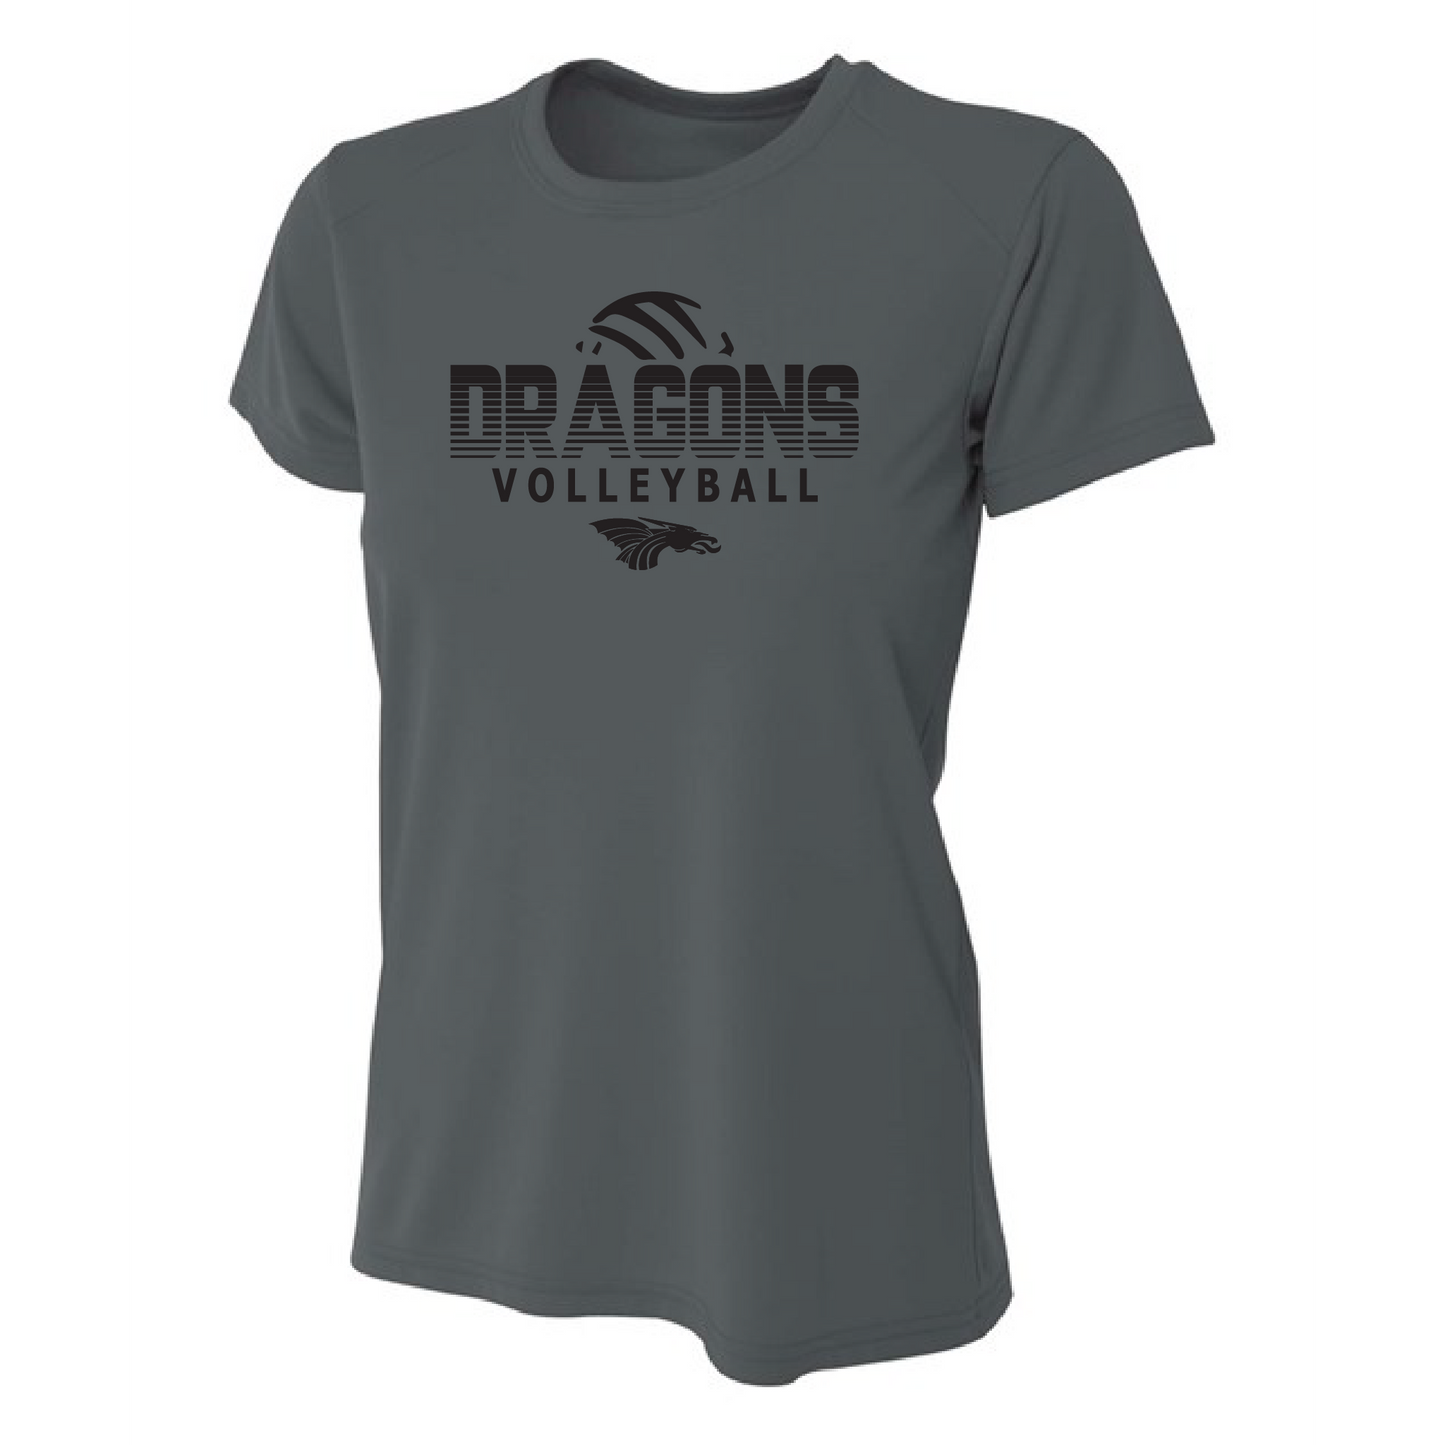 Womens S/S T-Shirt - Dragons Volleyball